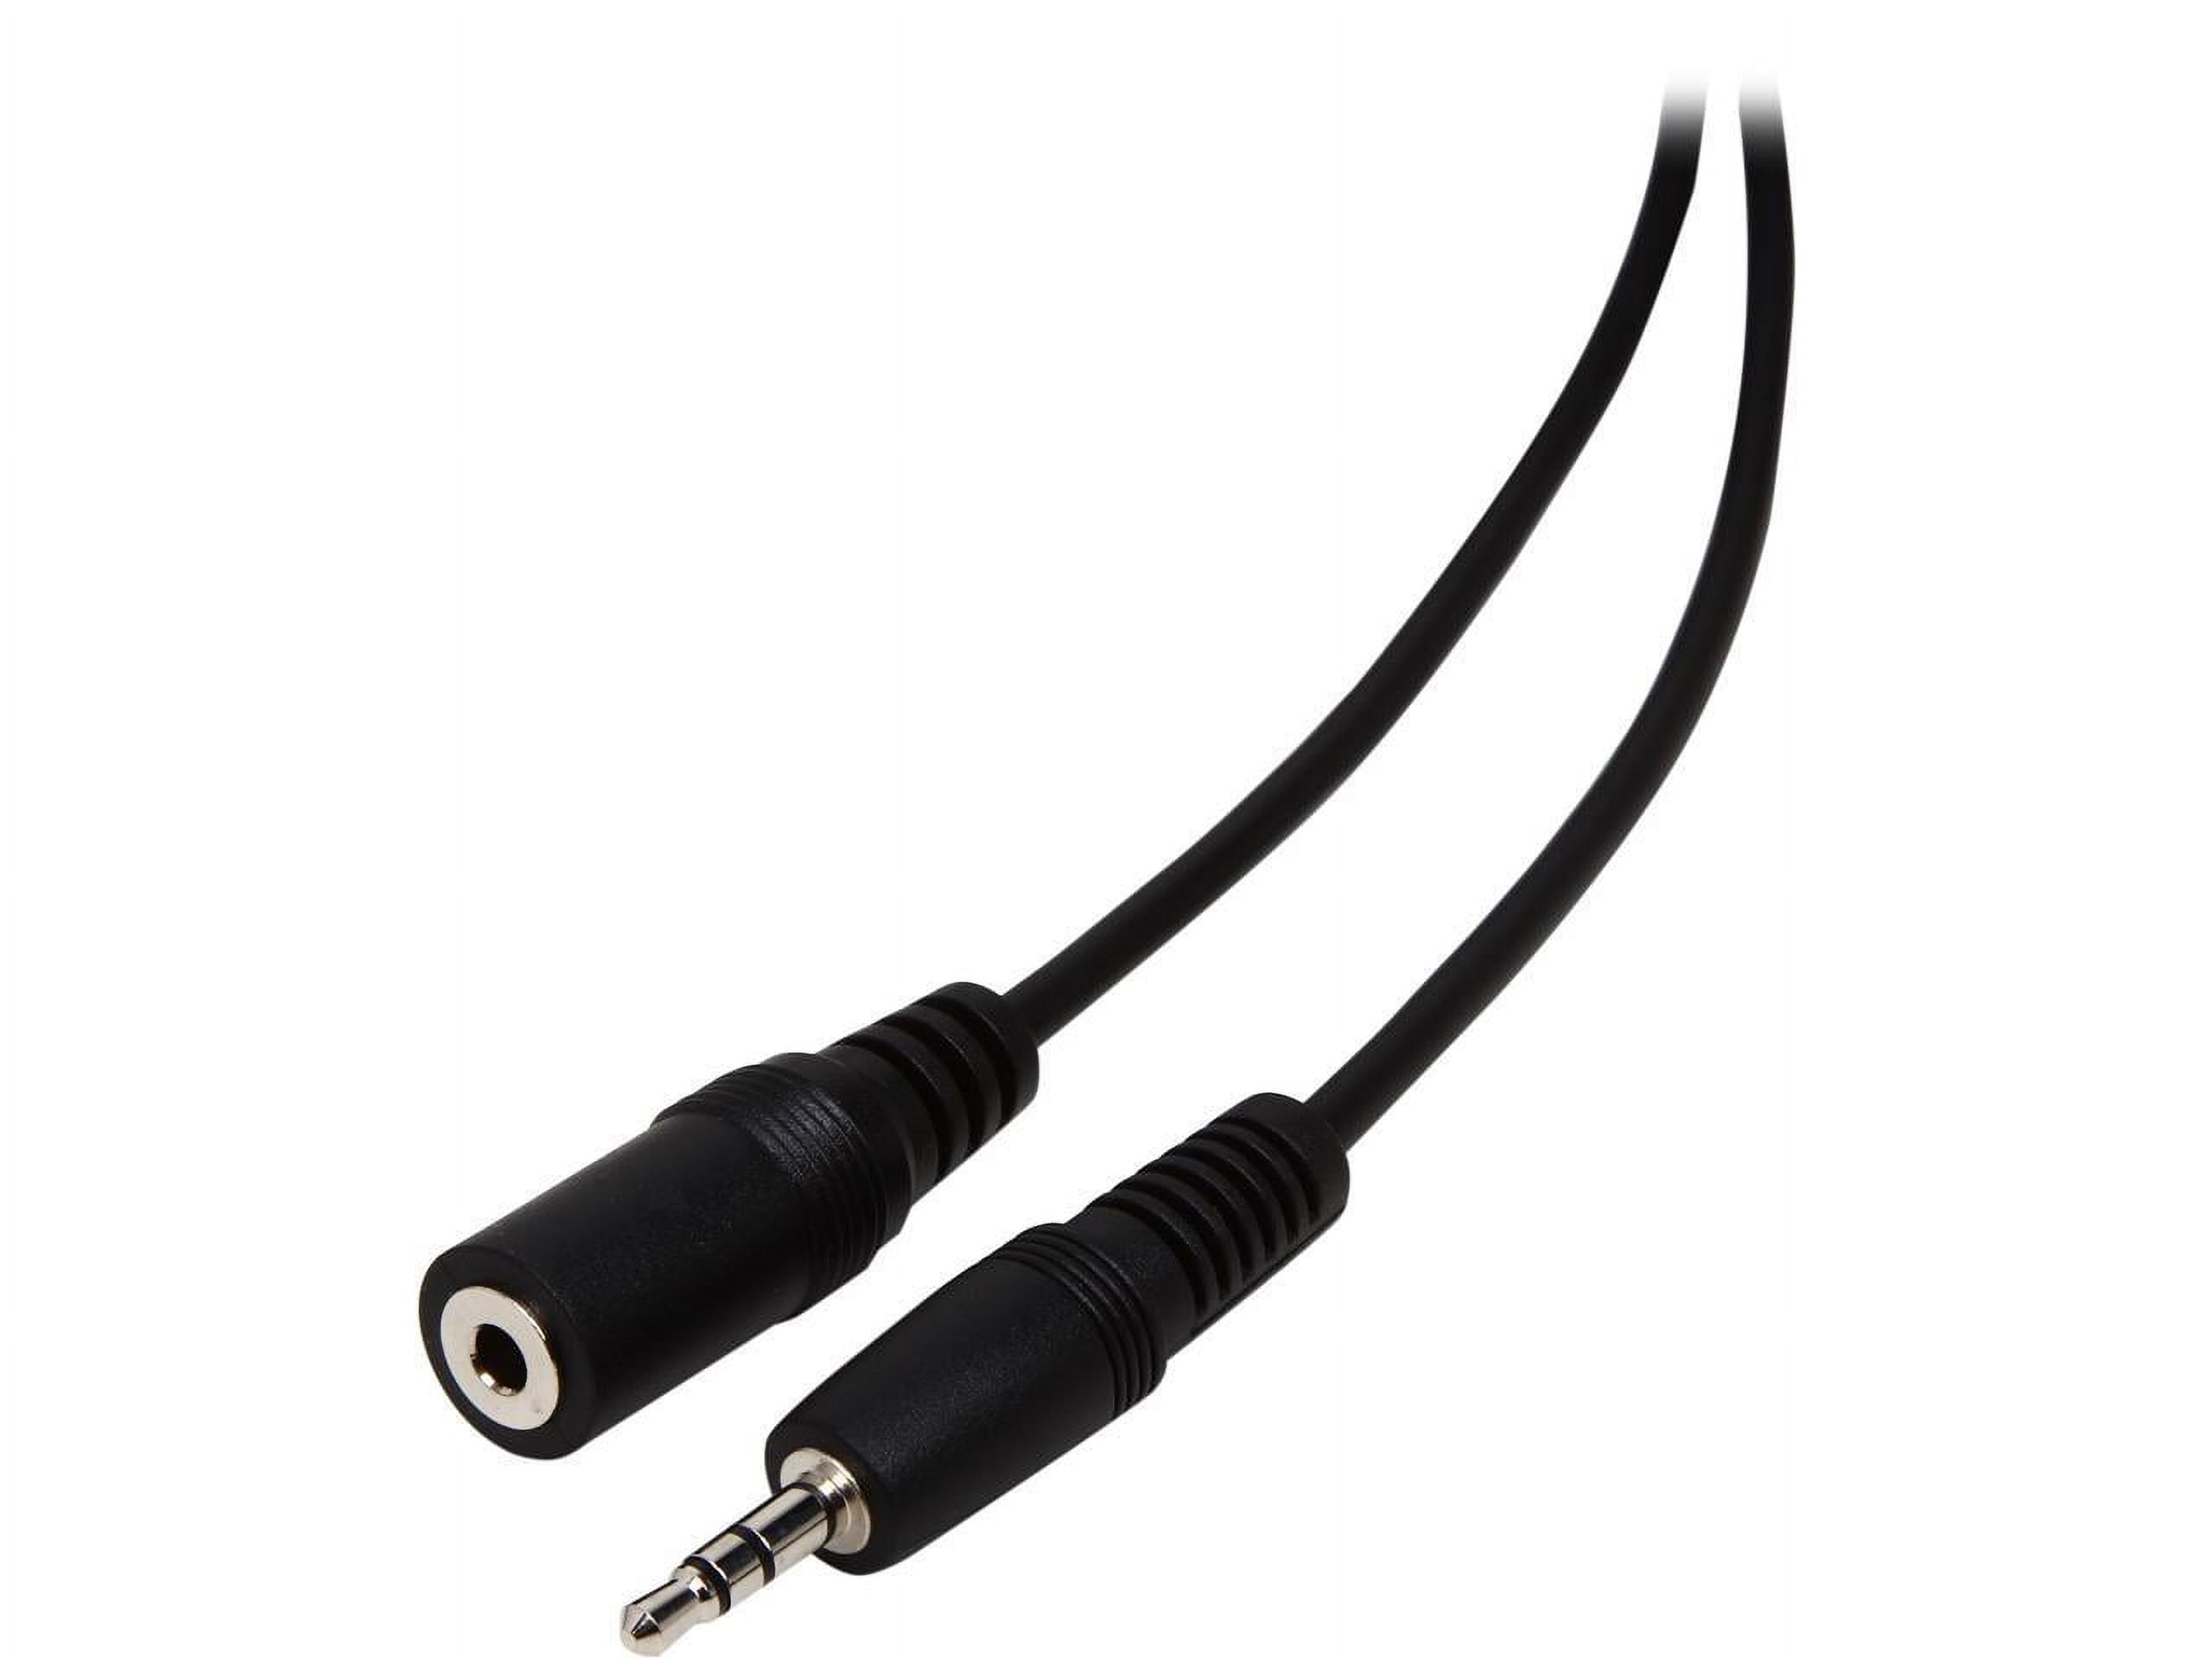 C2G 13787 3.5mm M/F Shielded Stereo Audio Extension Cable, Black (6 Feet, 1.82 Meters) - image 1 of 3